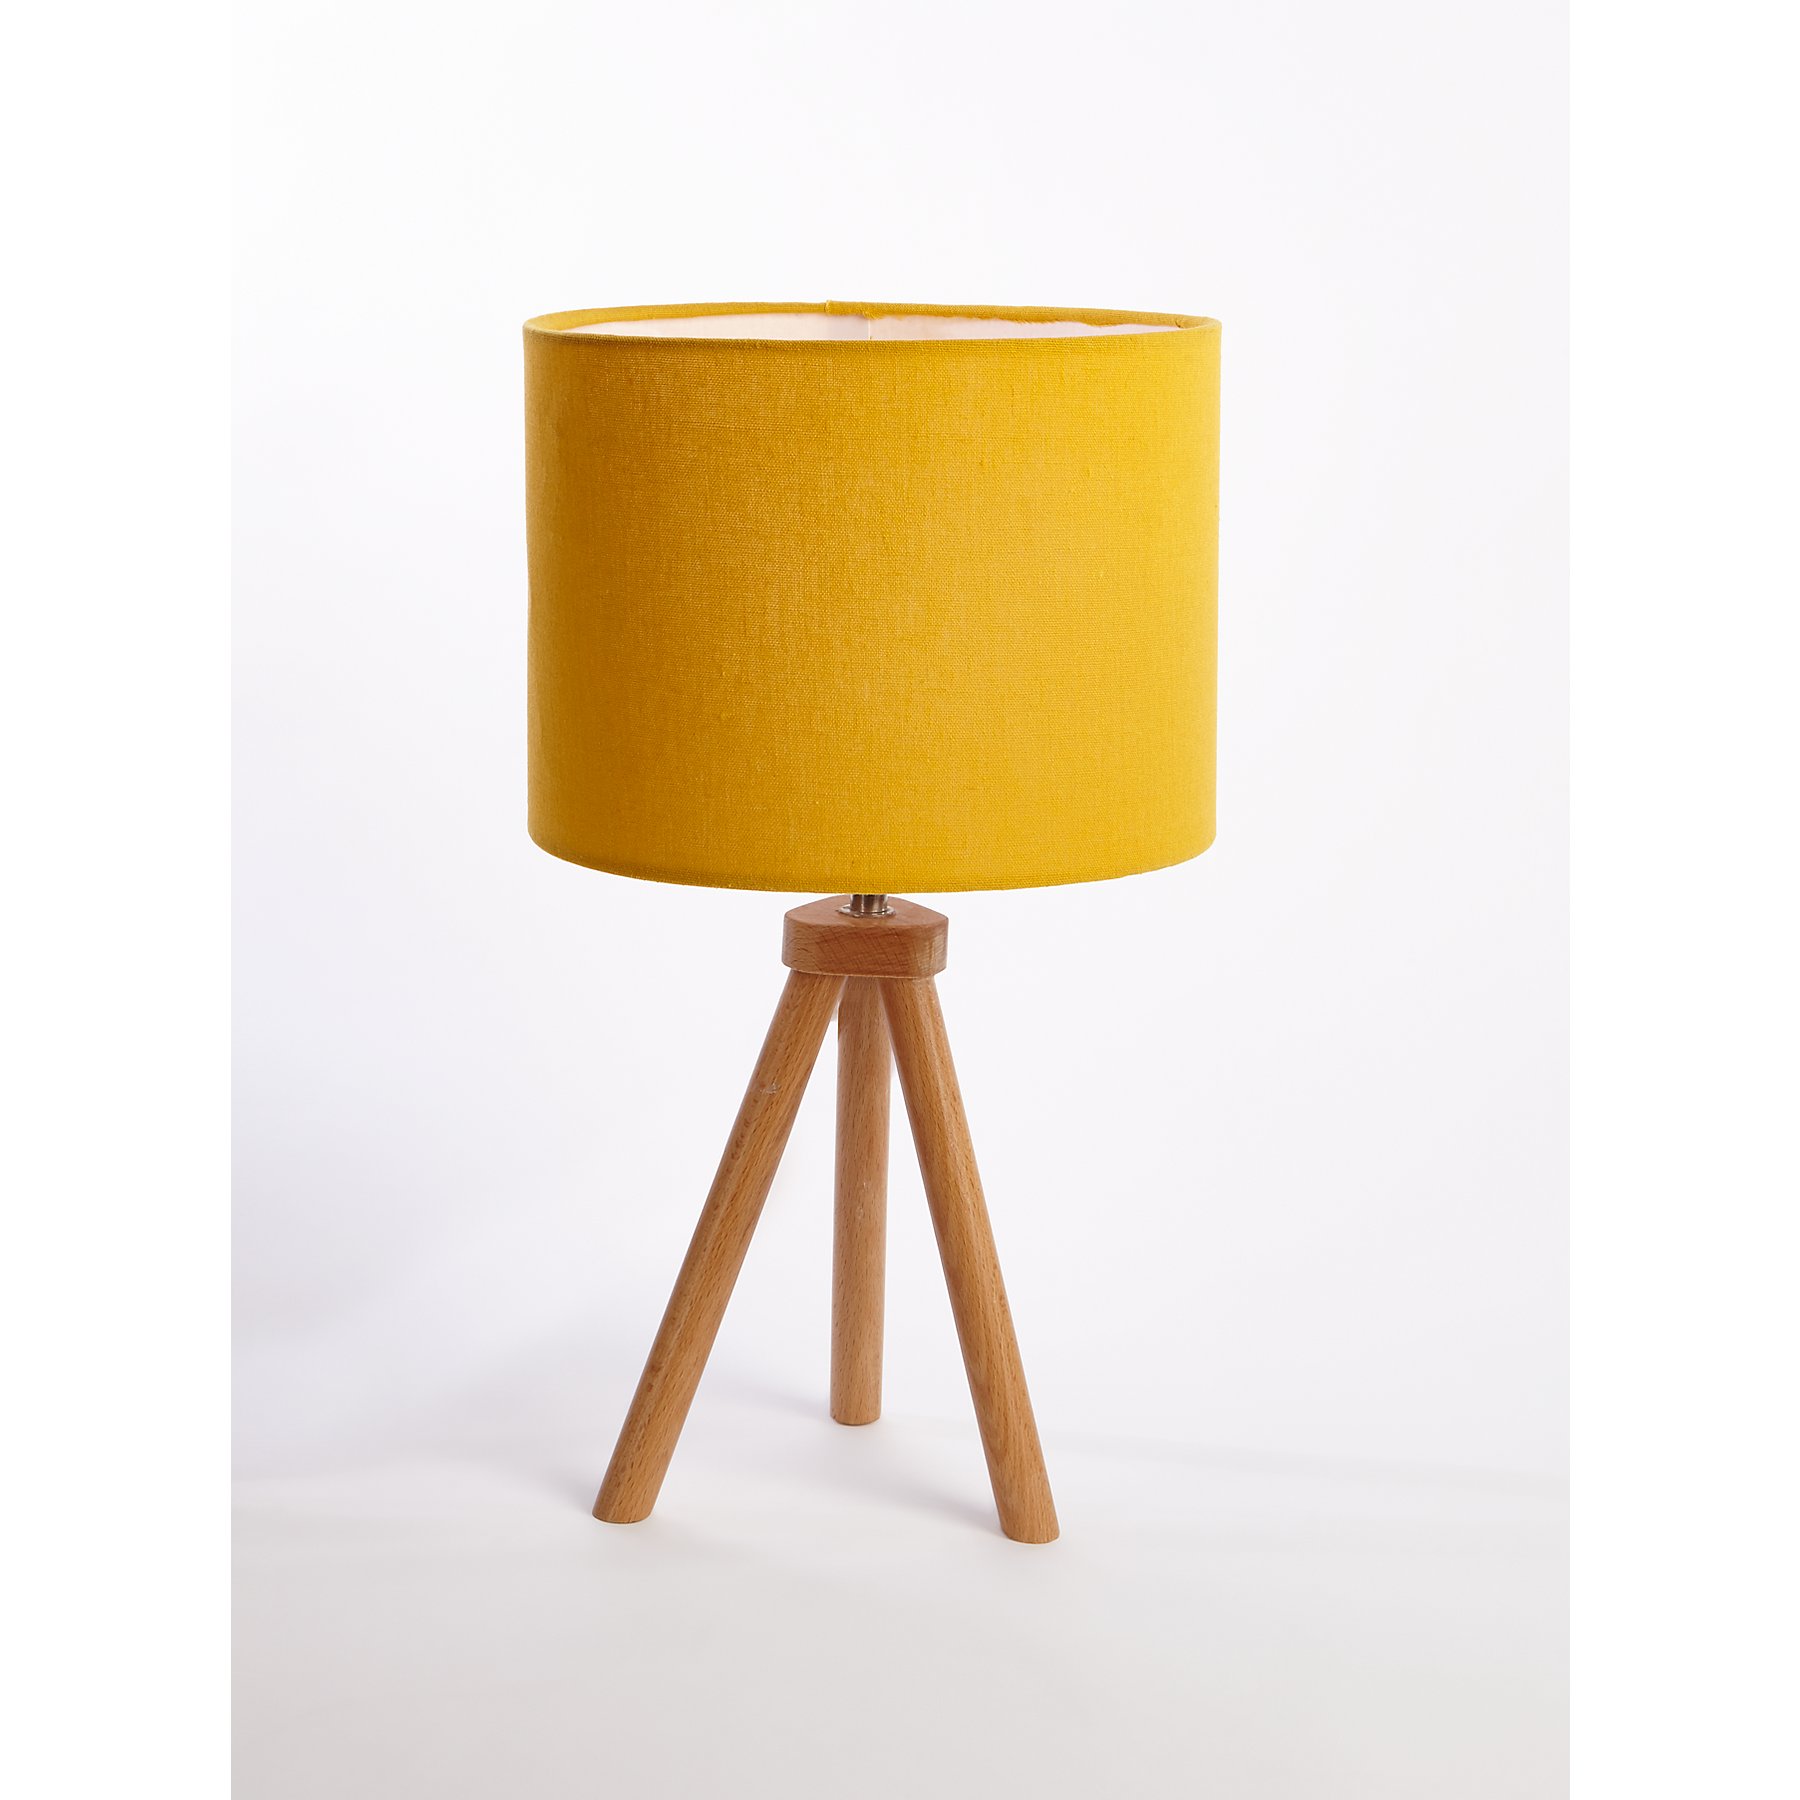 Yellow Wooden Tripod Table Lamp Home, Tripod Floor Lamp And Matching Table